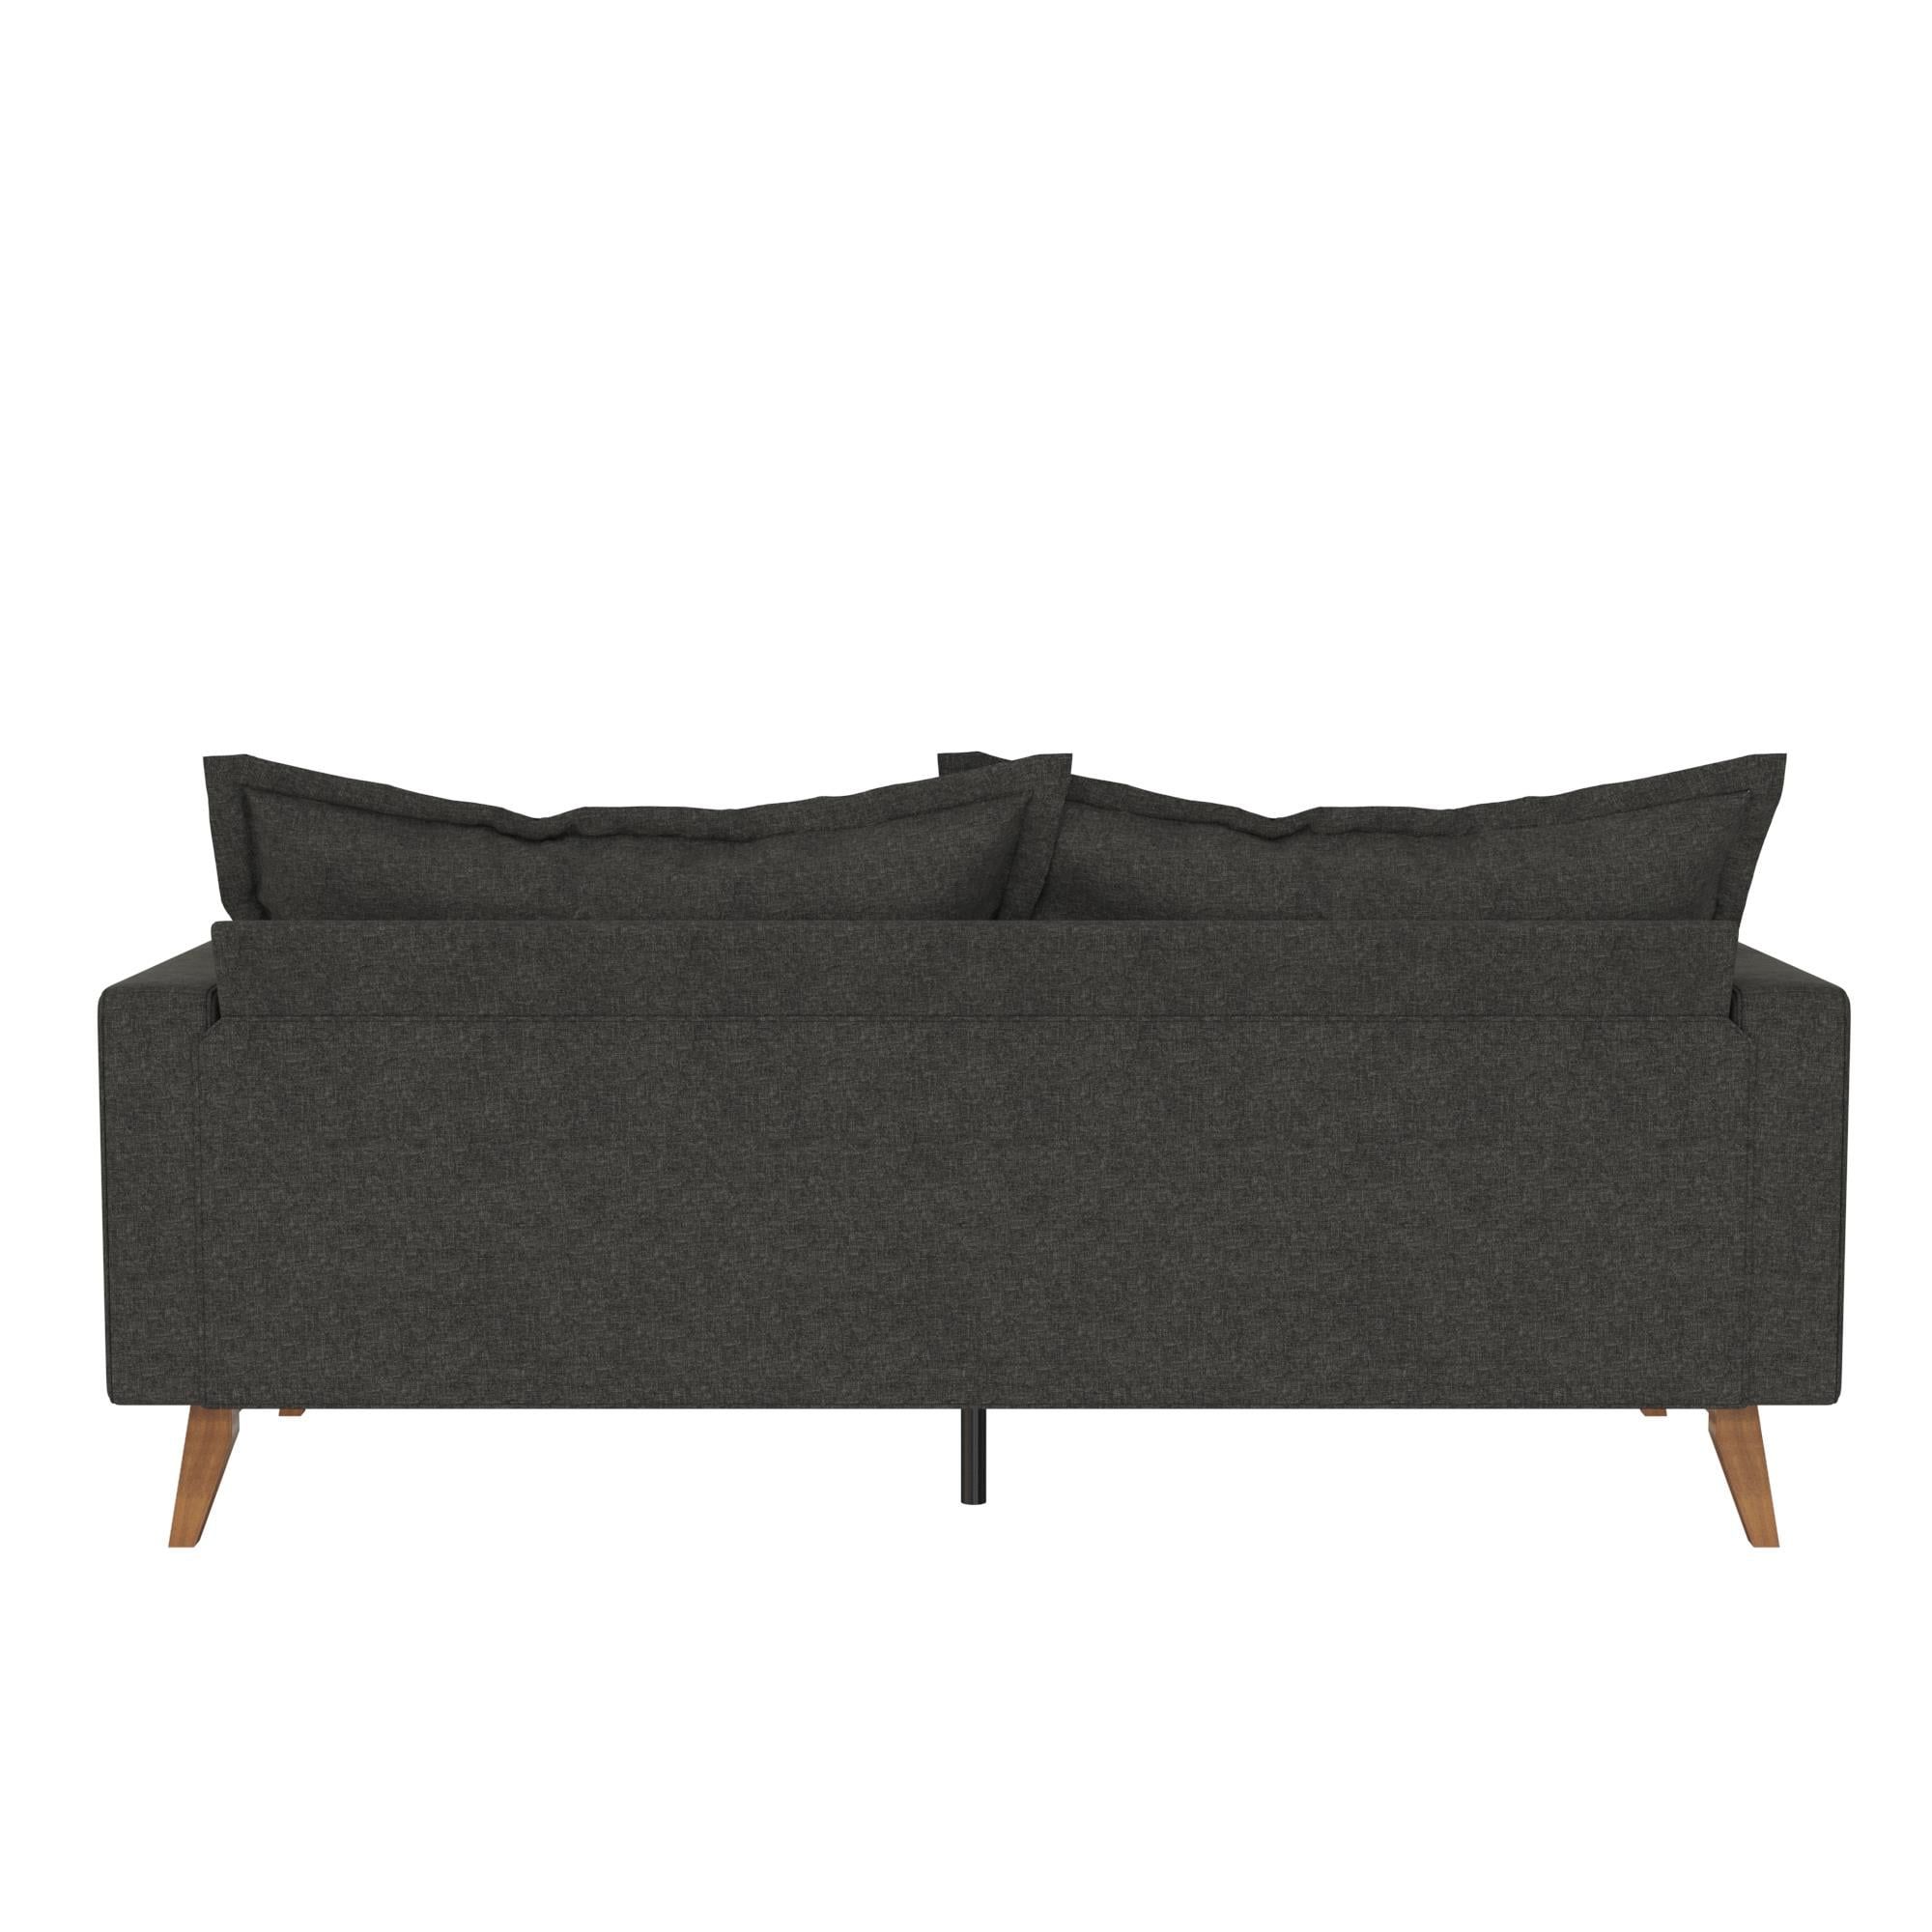 Dhp Miriam Pillowback Wood Base Sofa, Gray Linen – Walmart For Favorite Sofas With Pillowback Wood Bases (View 15 of 15)